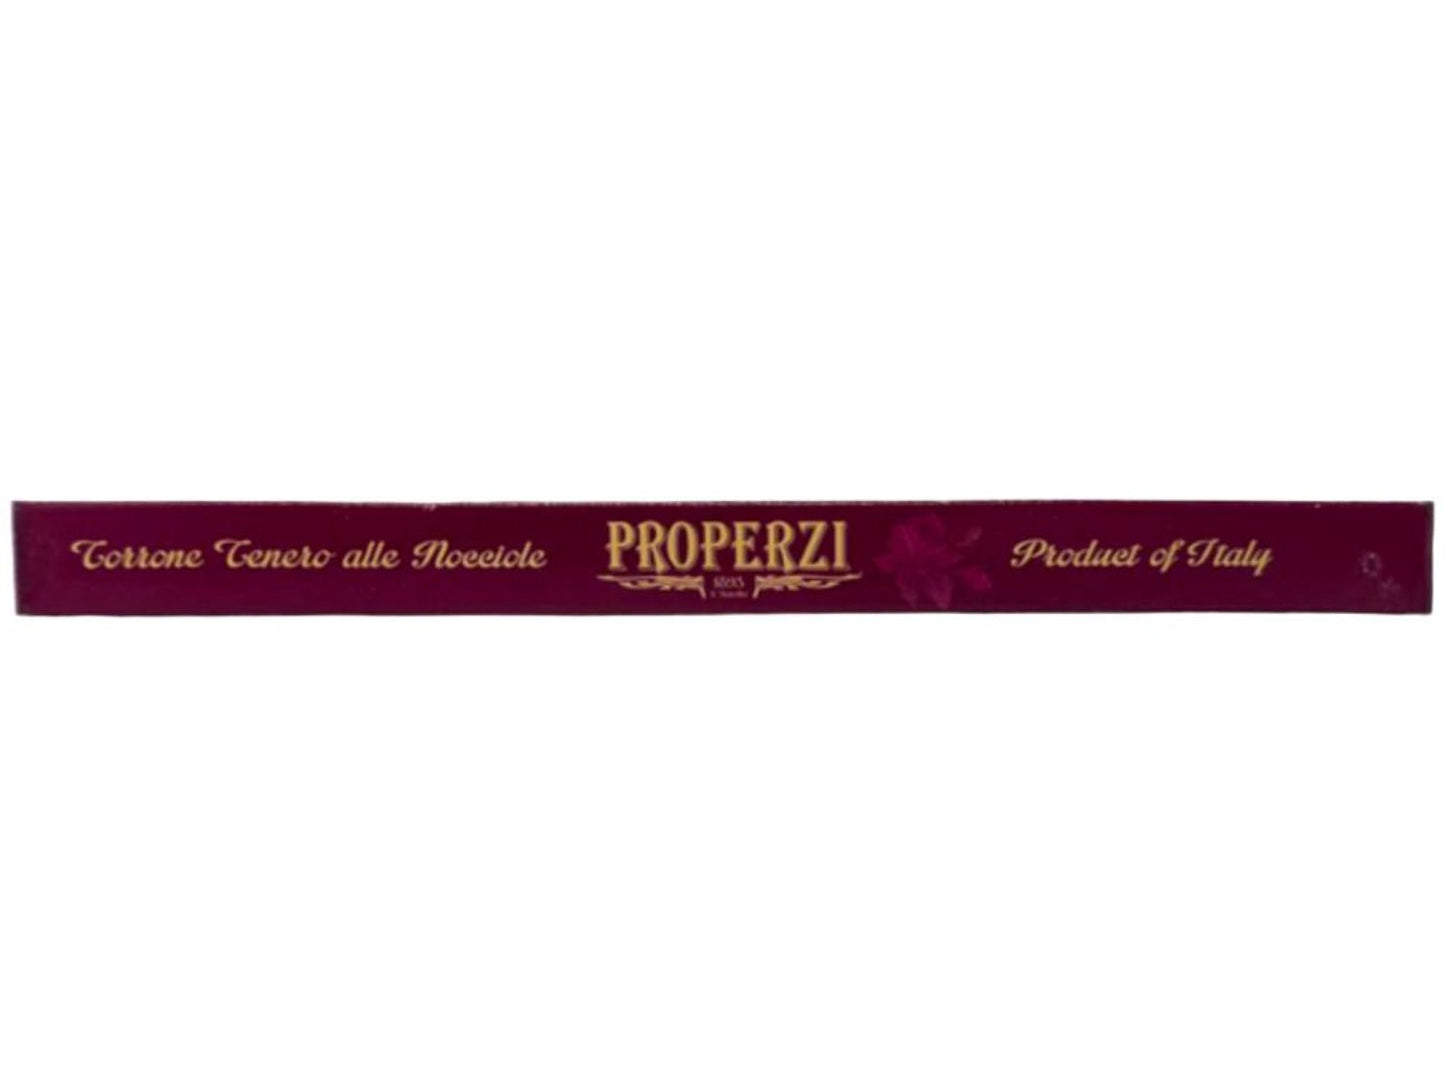 Properzi Italian Soft Nougat Candy With Hazelnuts 200g - 2 Pack Total 400g Best Before End of February 2025